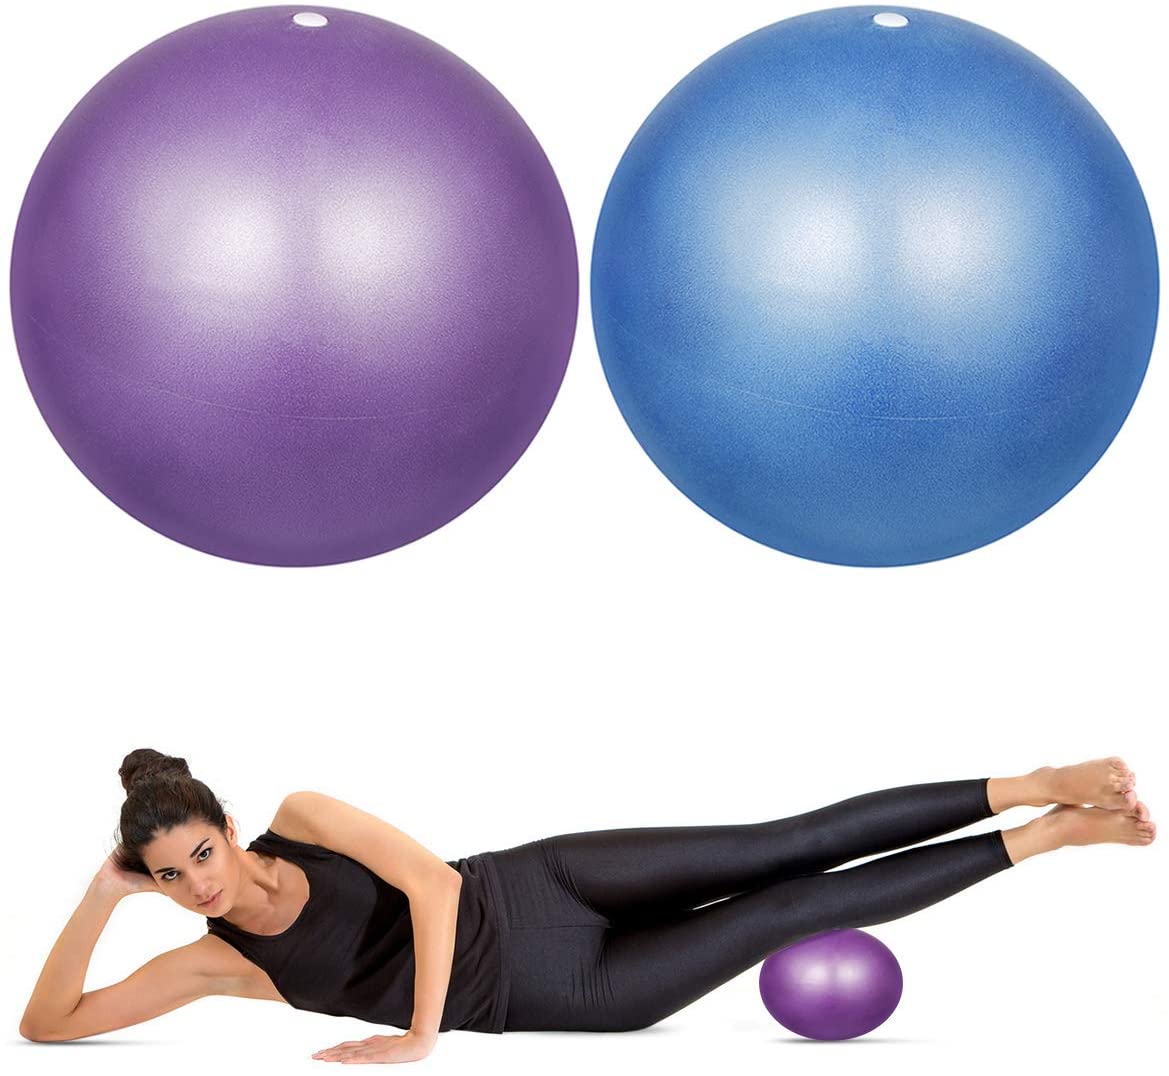 Yoga Pilates EXERCISE BALL Gym Class Balance Support Training Soft Fitness Aid 